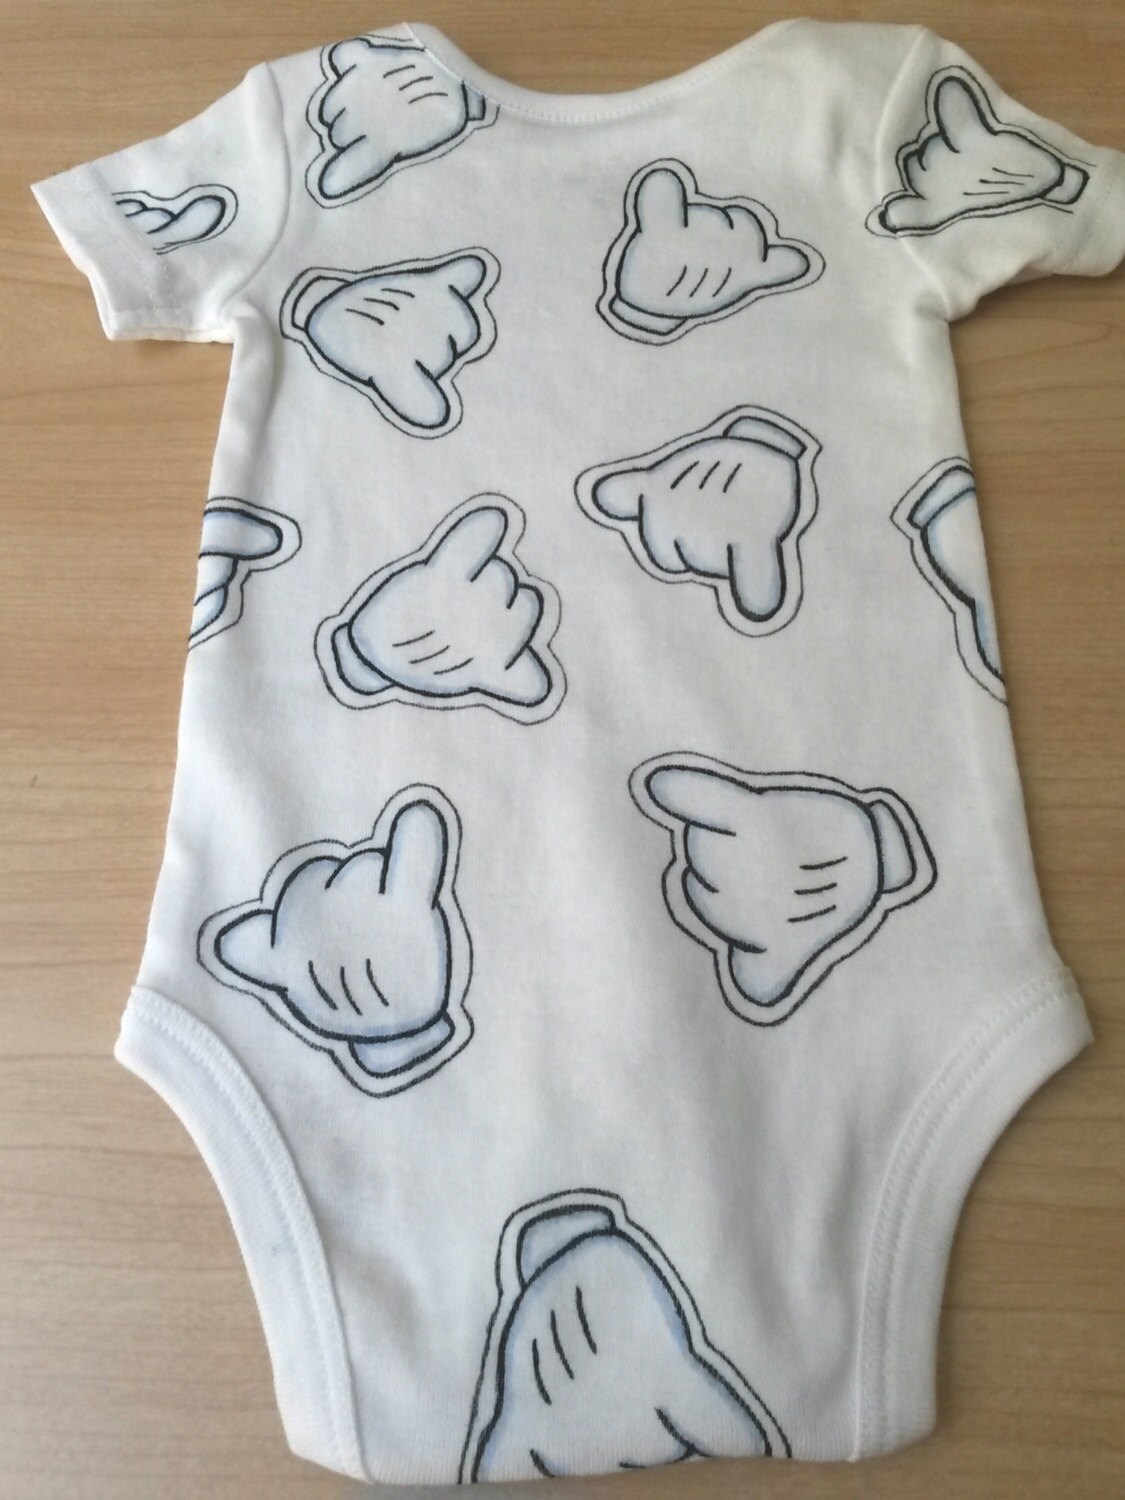 Micky Mouse Hands Shaka Pattern Baby Onesie hand Painted | Etsy